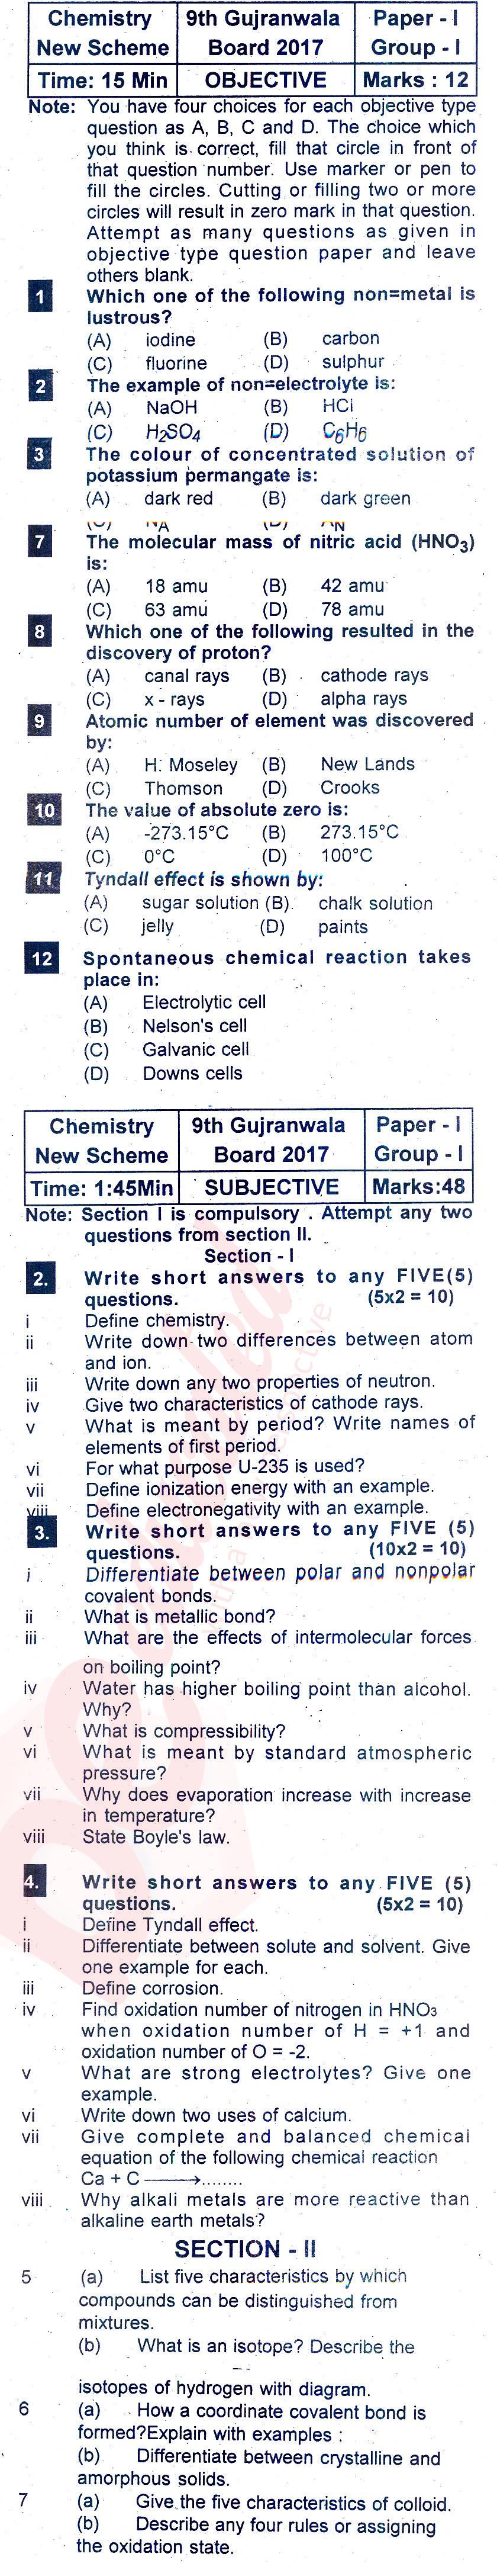 Chemistry 9th English Medium Past Paper Group 1 BISE Gujranwala 2017